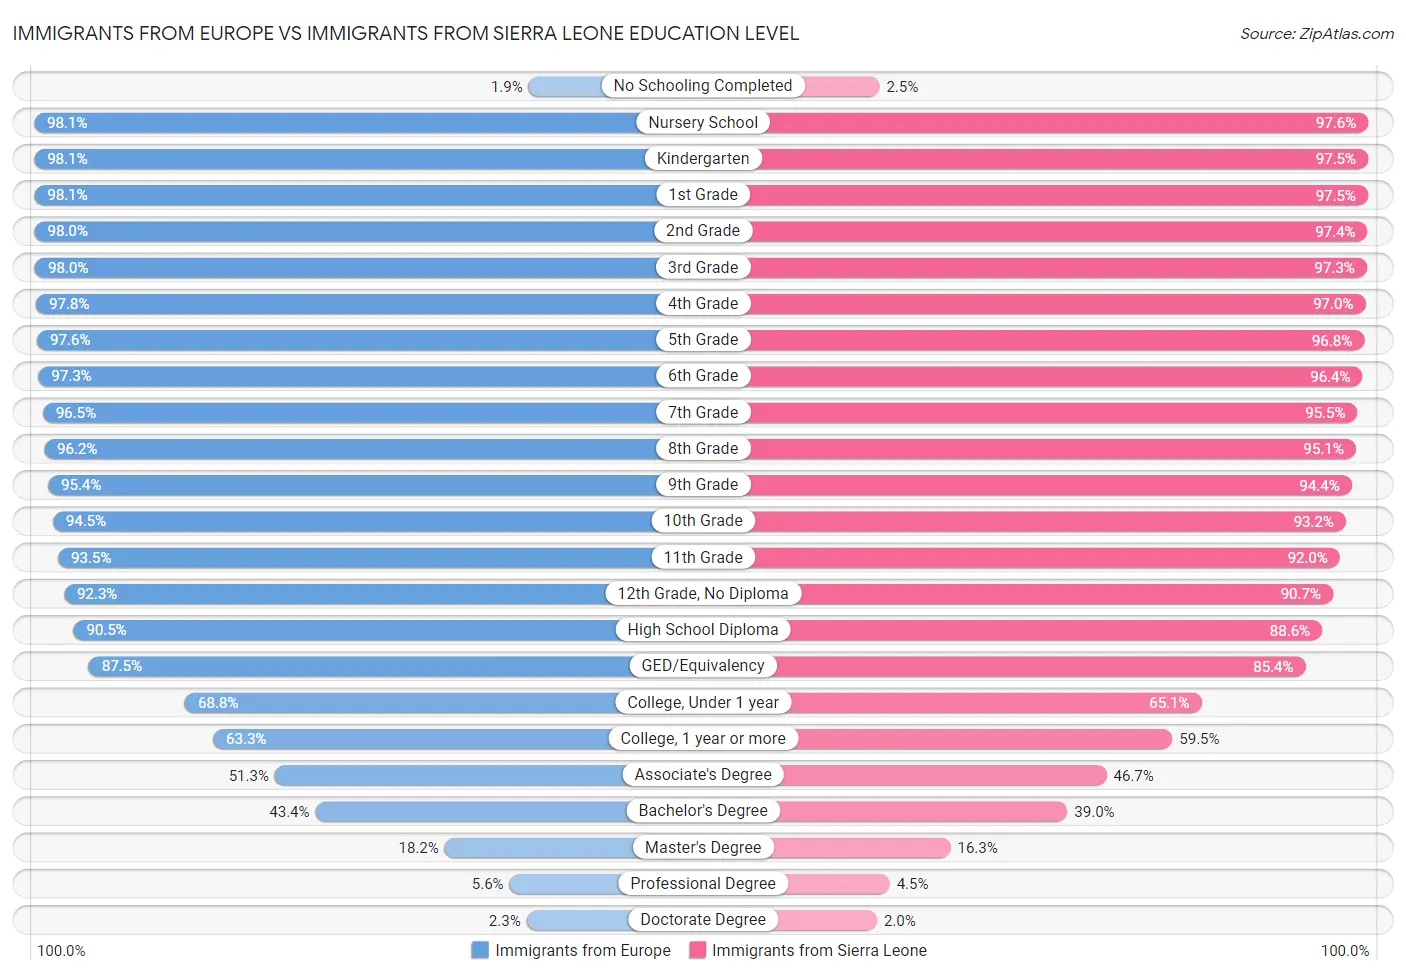 Immigrants from Europe vs Immigrants from Sierra Leone Education Level